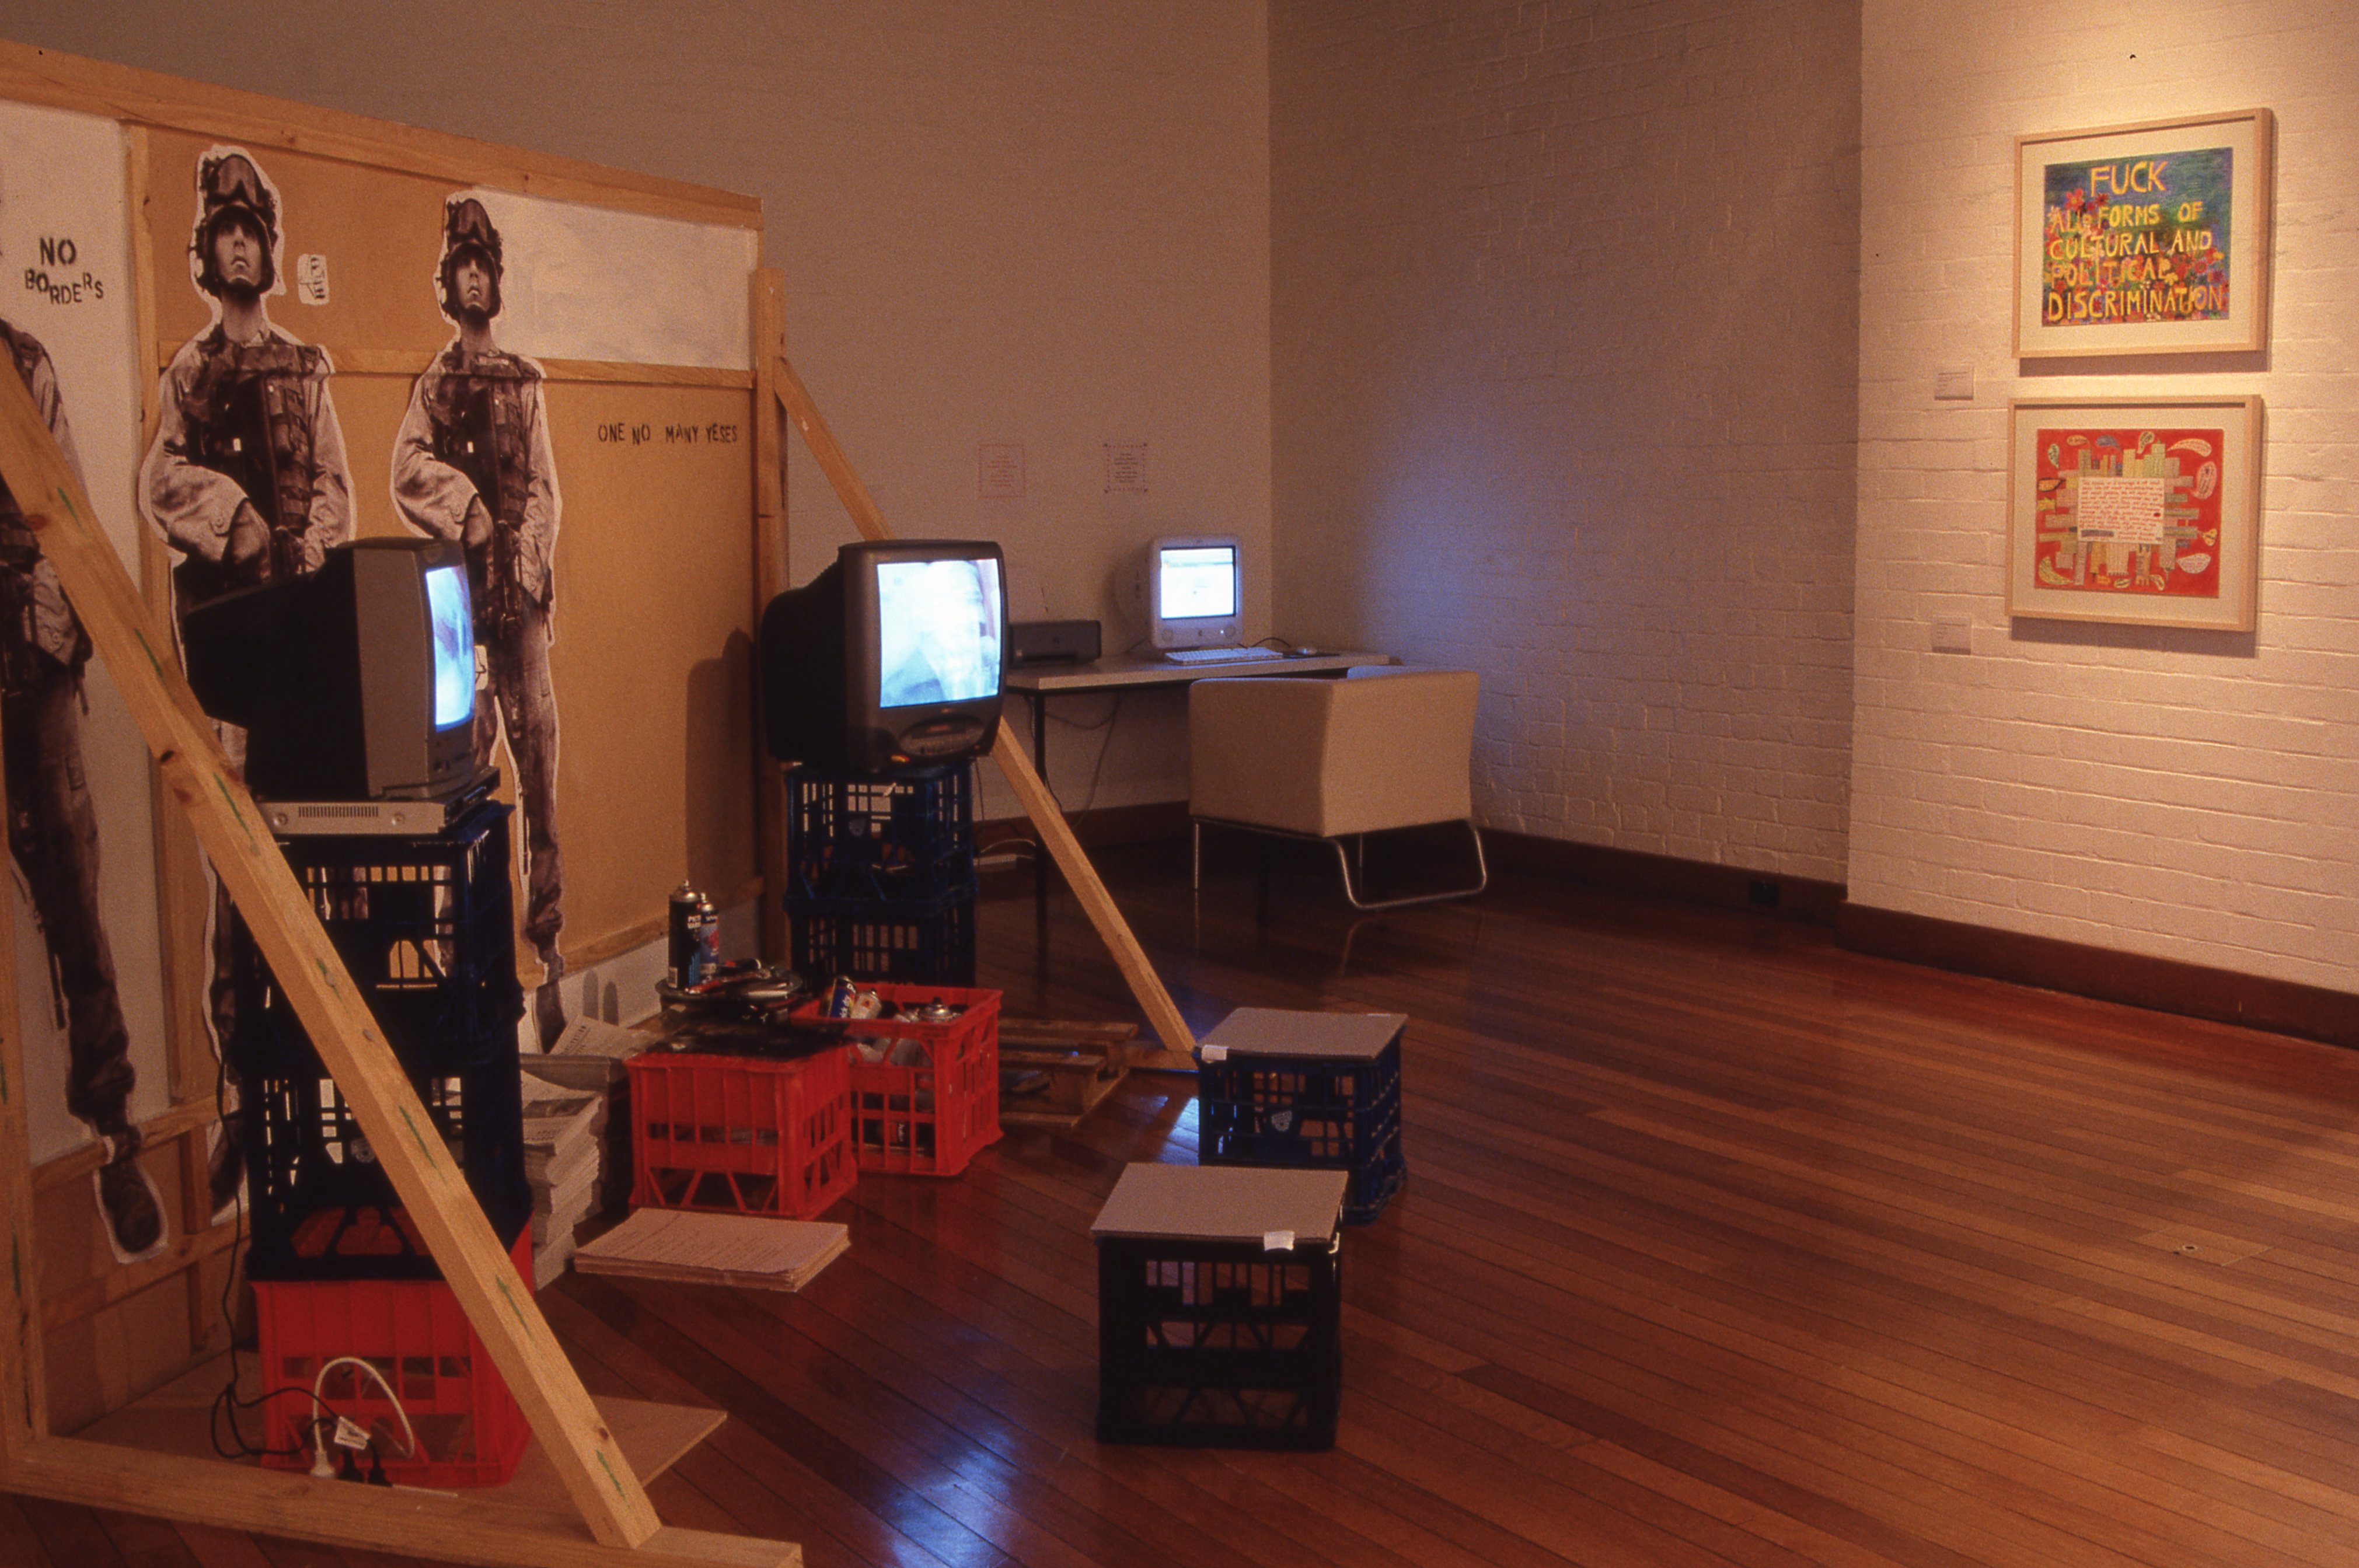 idg_archive2005_disobedience_01_install.jpg